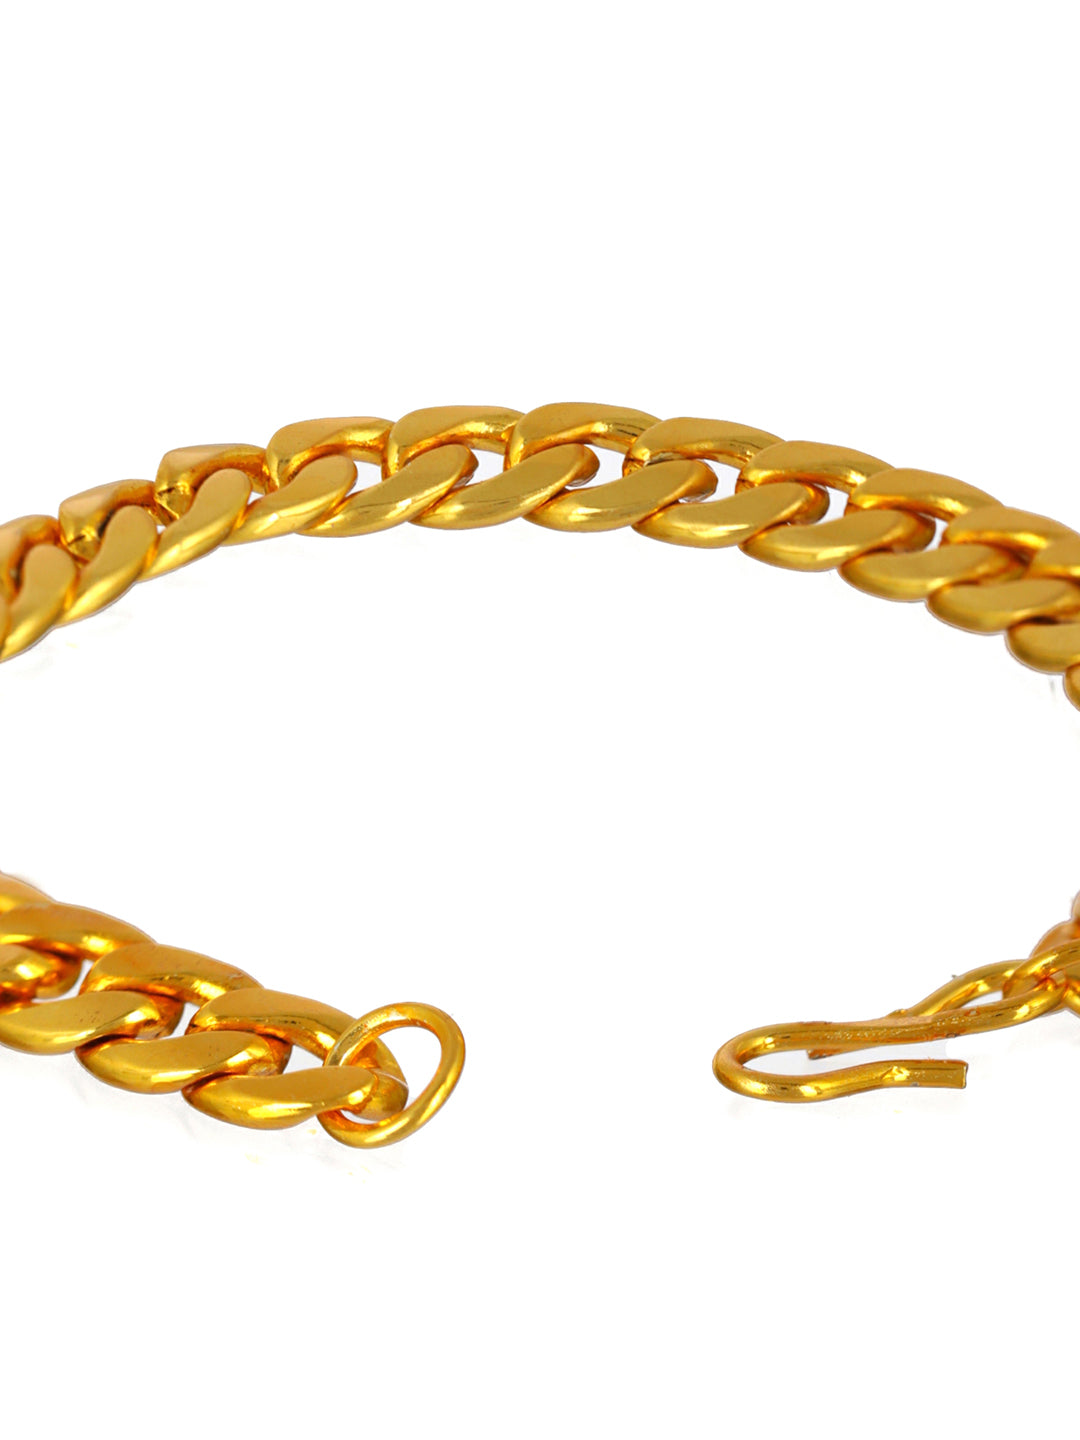 Real 24K Gold Plated Fish Scales Link 24k Gold Bracelet Mens With Unique  Domineering Sun Pattern Perfect For Anniversary, Birthday, Wedding And Fine  Jewelry For Men From Kaleidoo, $24.71 | DHgate.Com